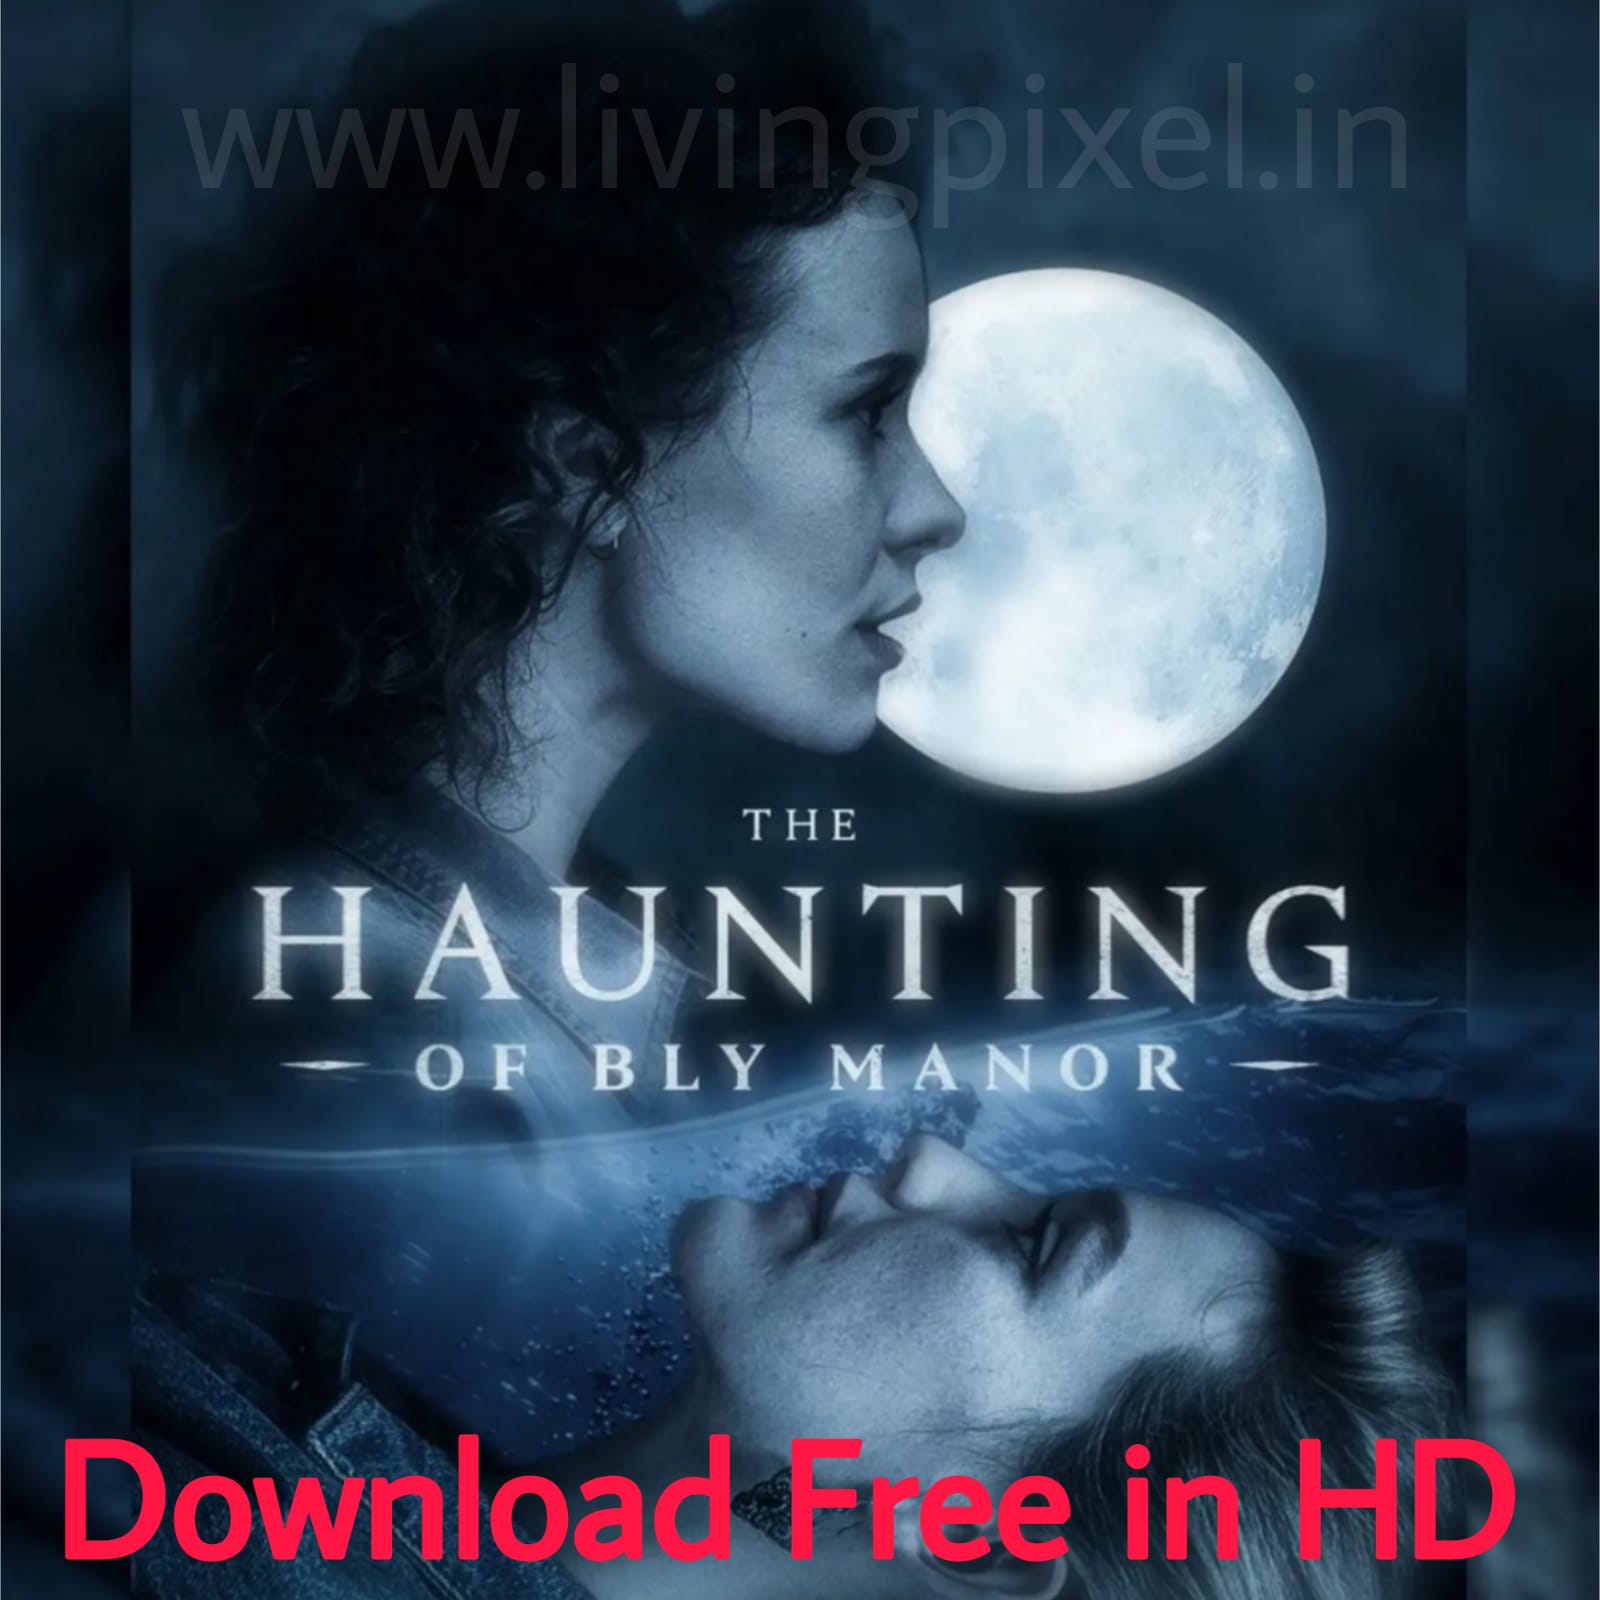 The Haunting of Bly Manor full series download telegram link thumb